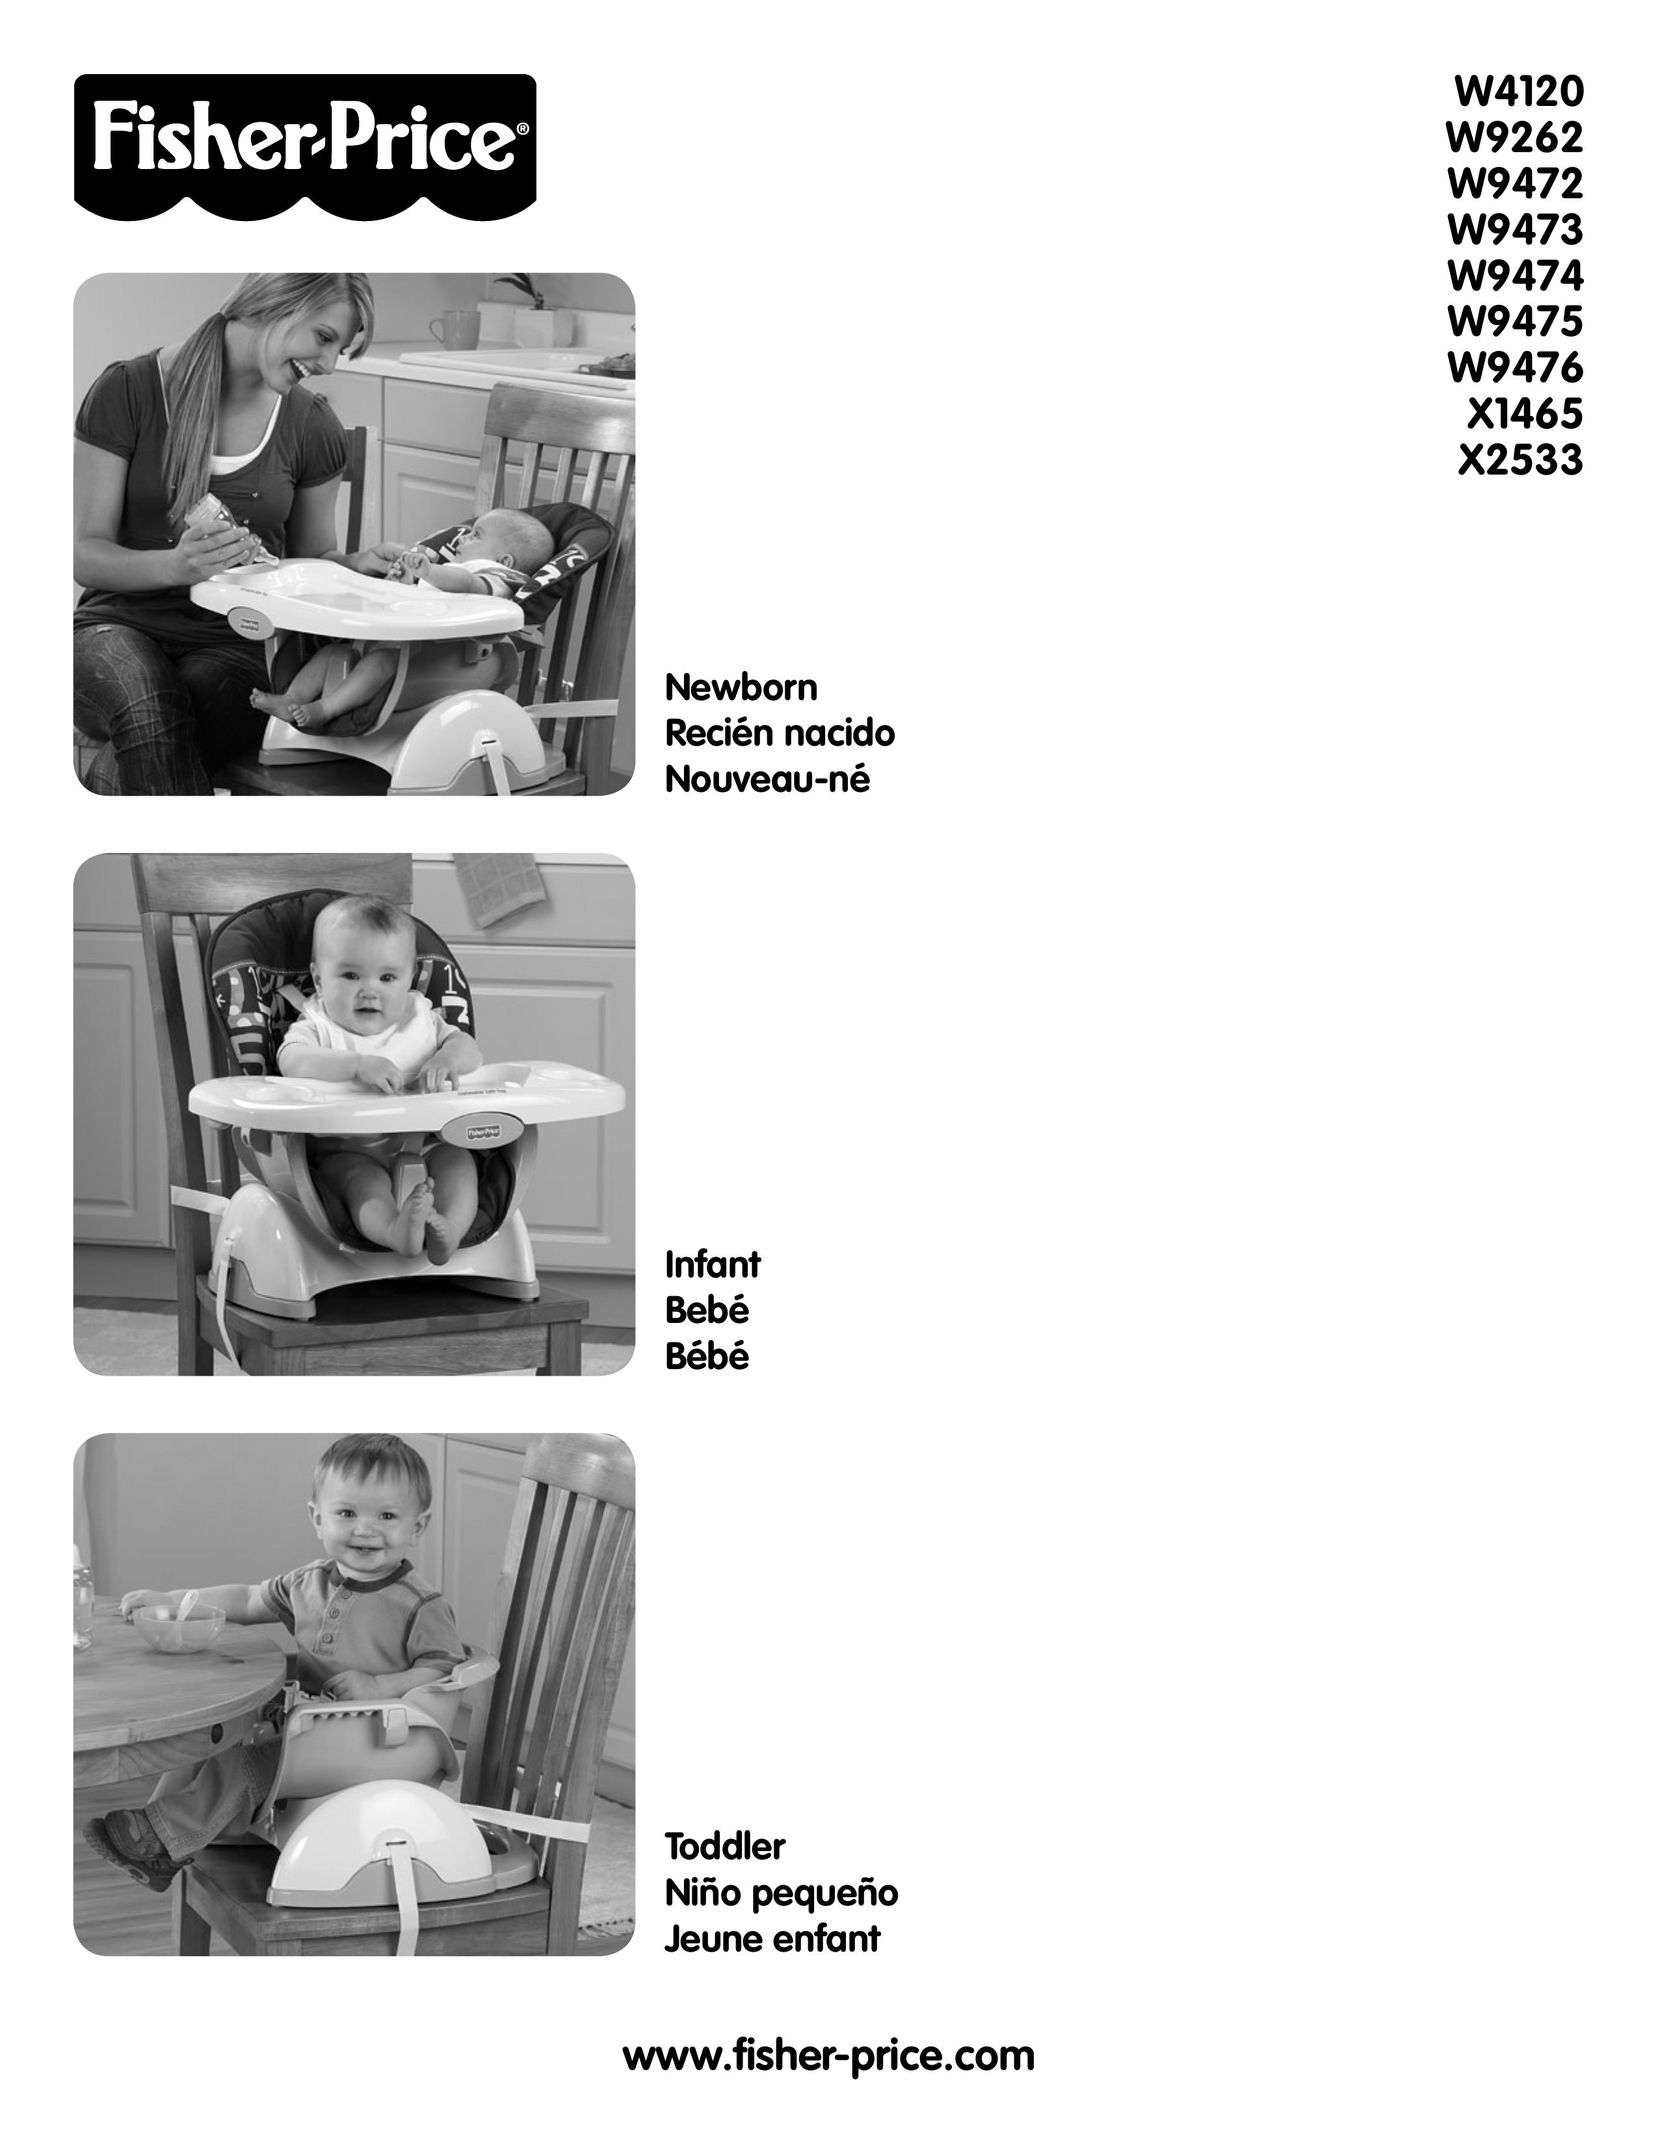 Fisher-Price W4120 High Chair User Manual